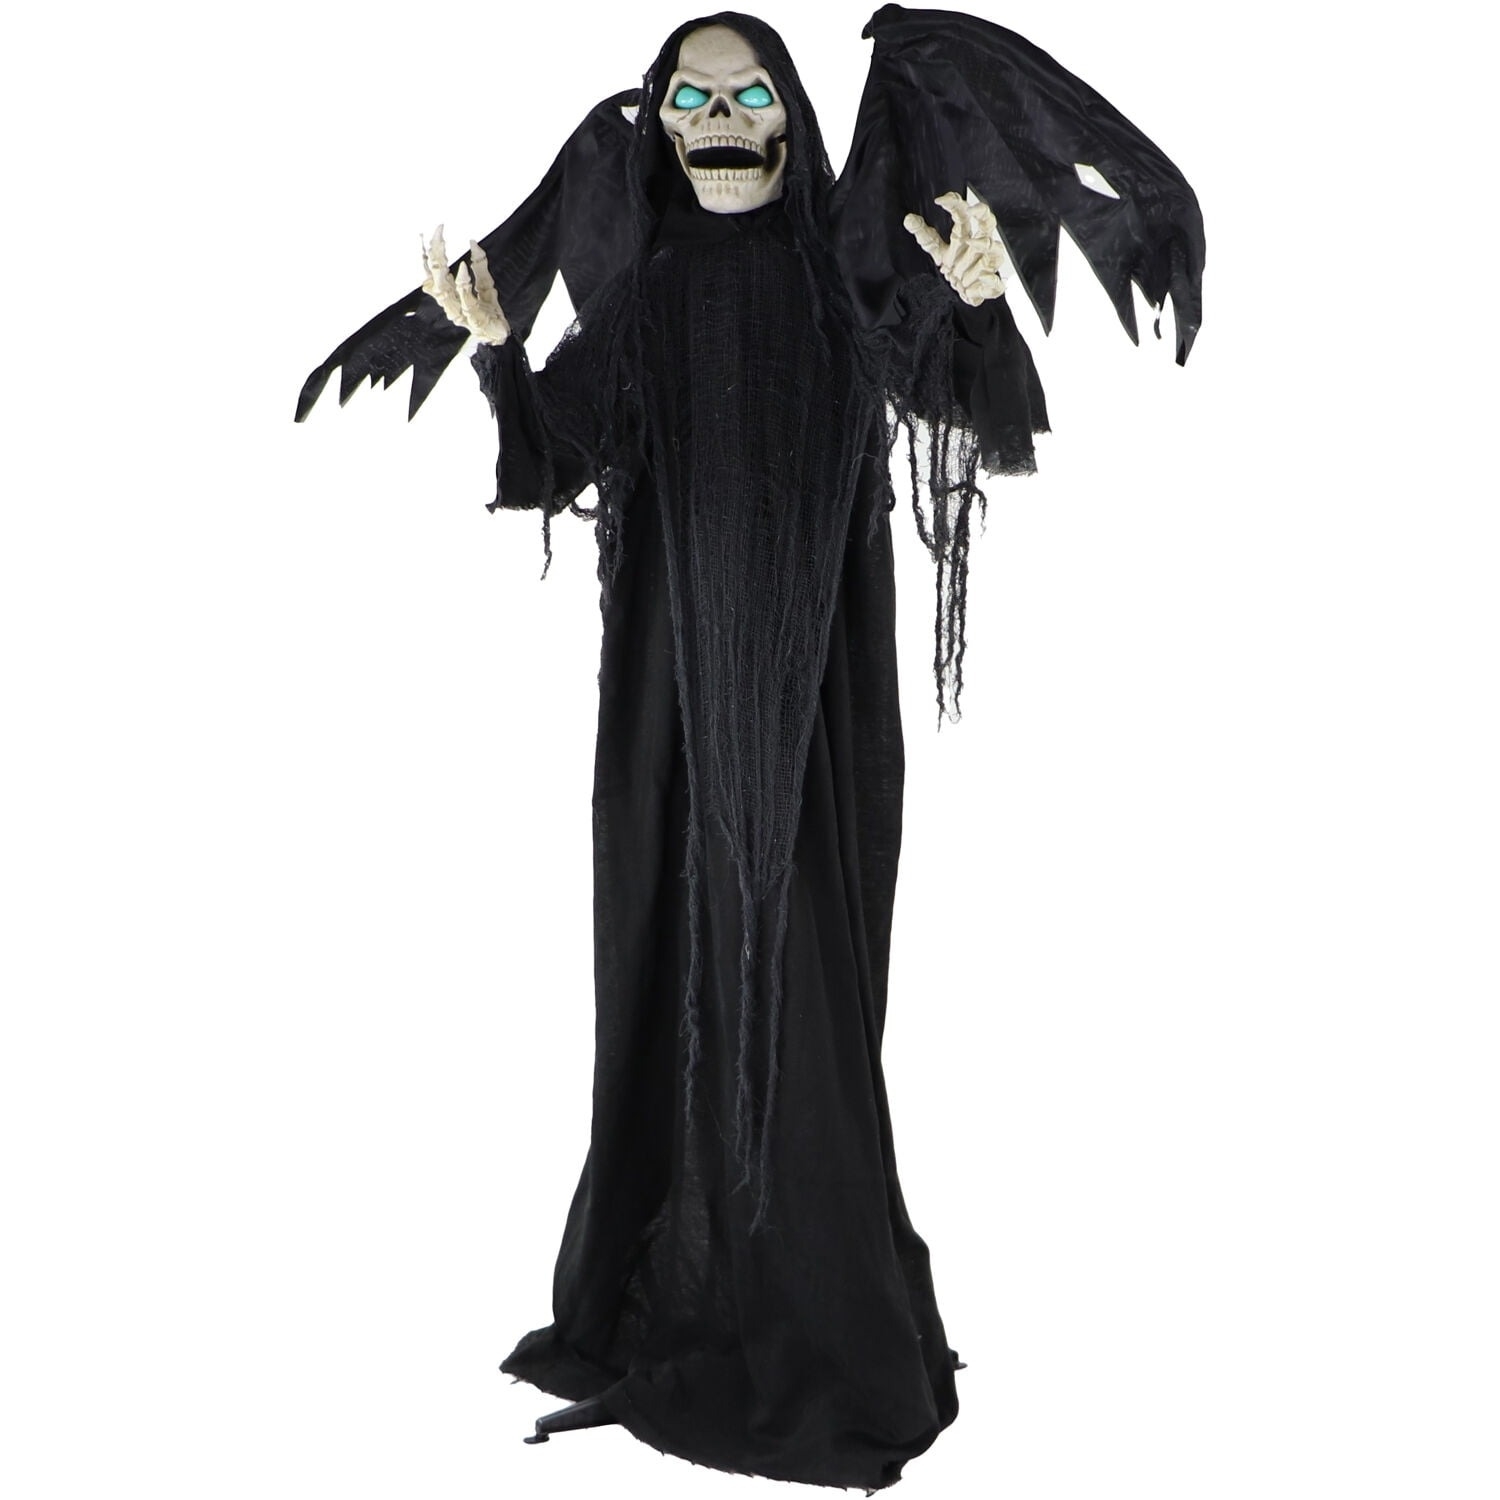 the black cloaked grim reaper with green eyes and wings